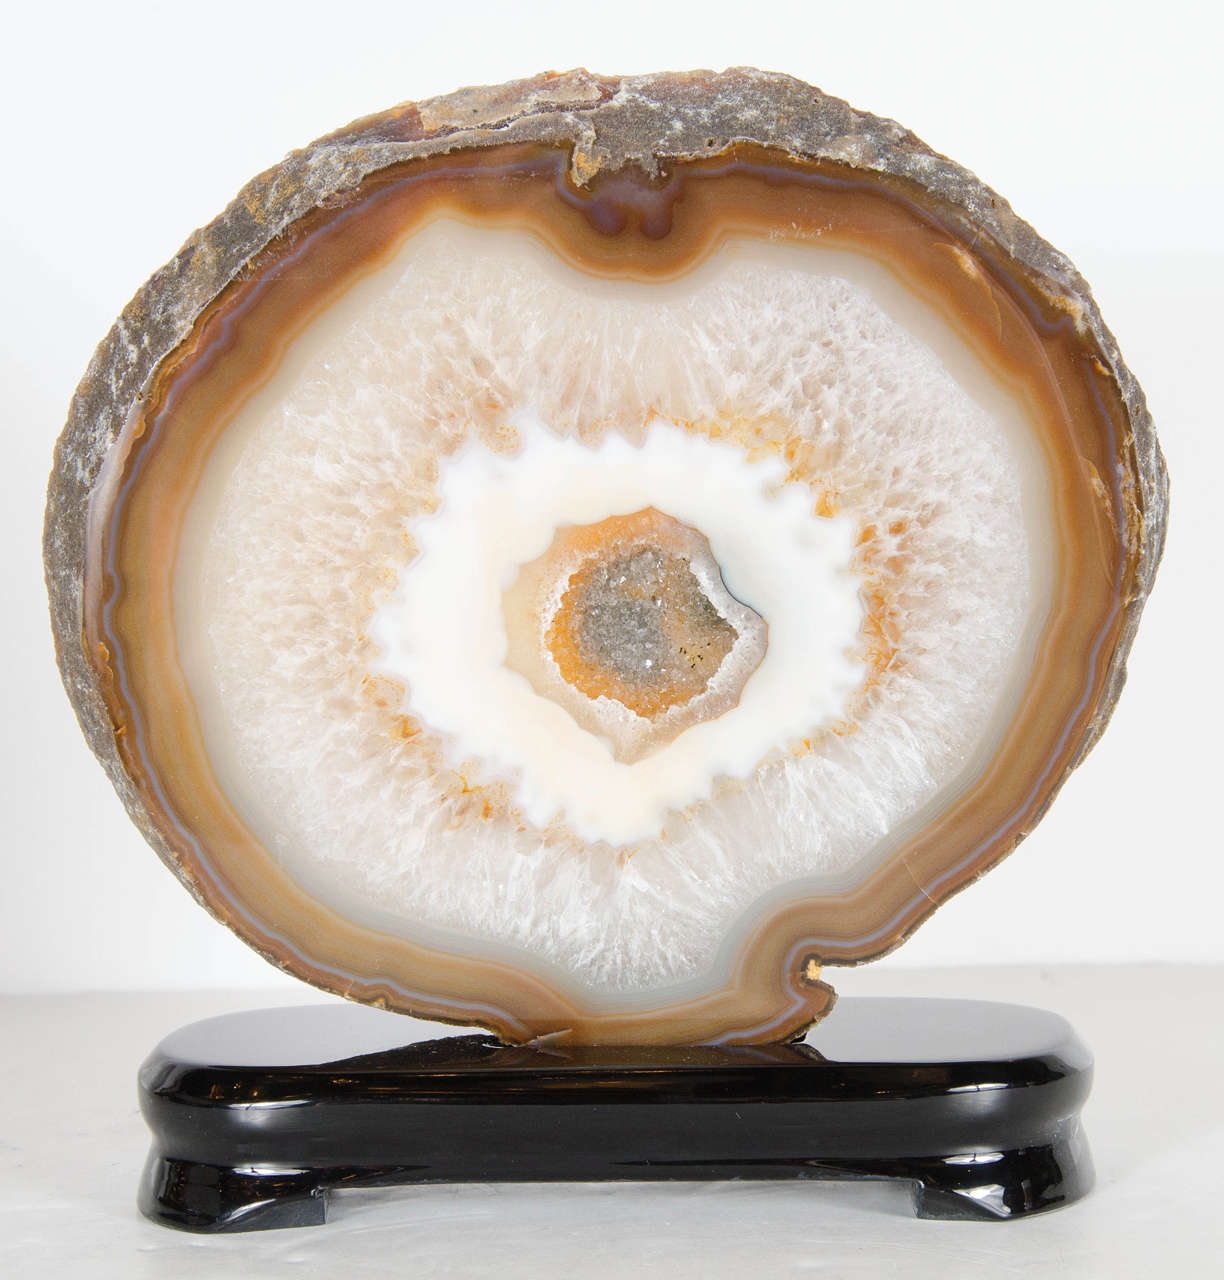 This stunning sliced geode agate features a circular design with three interior layers of vibrant colors. Mixed in shades of citrine, pearl, and umber it's uniqueness is a one of kind. In the center of it's cylindrical shape, there is an amassed